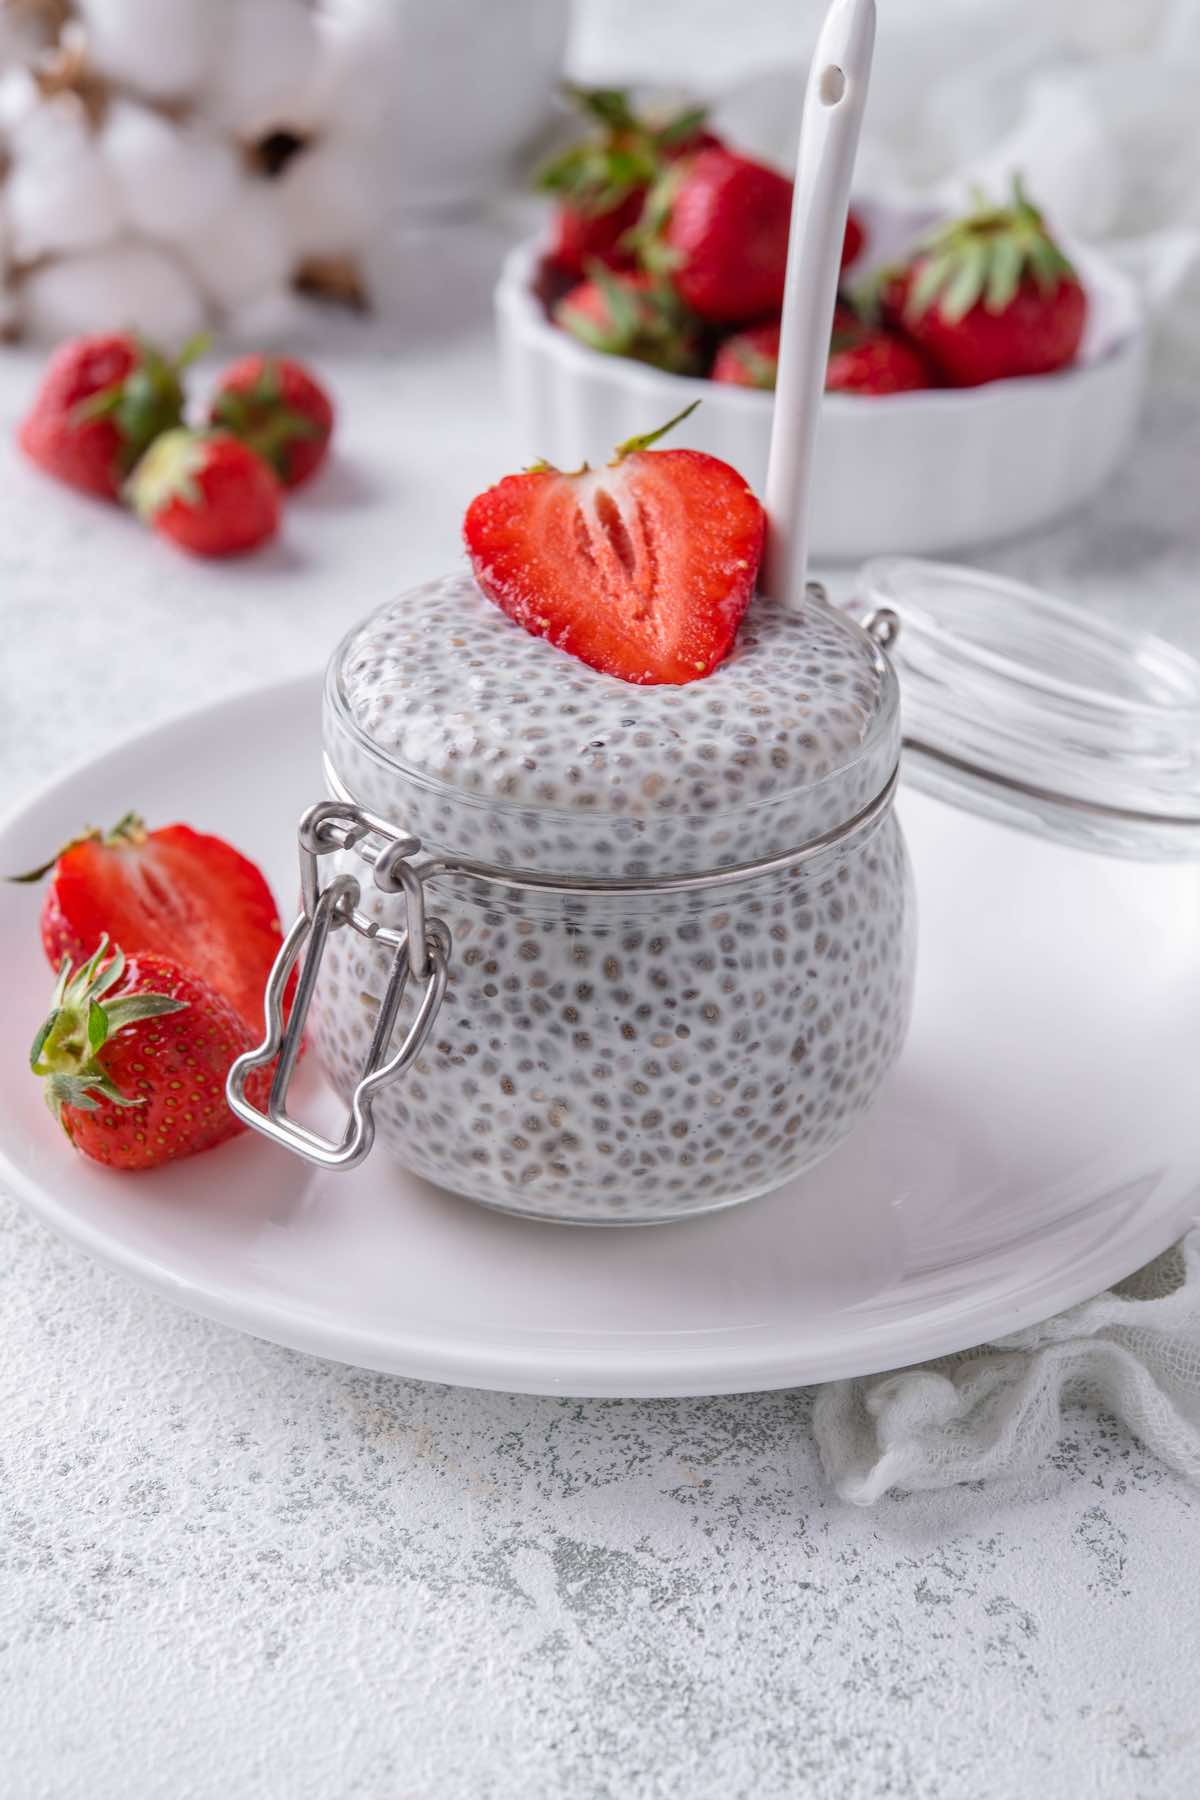 chia pudding with low carb ingredients.